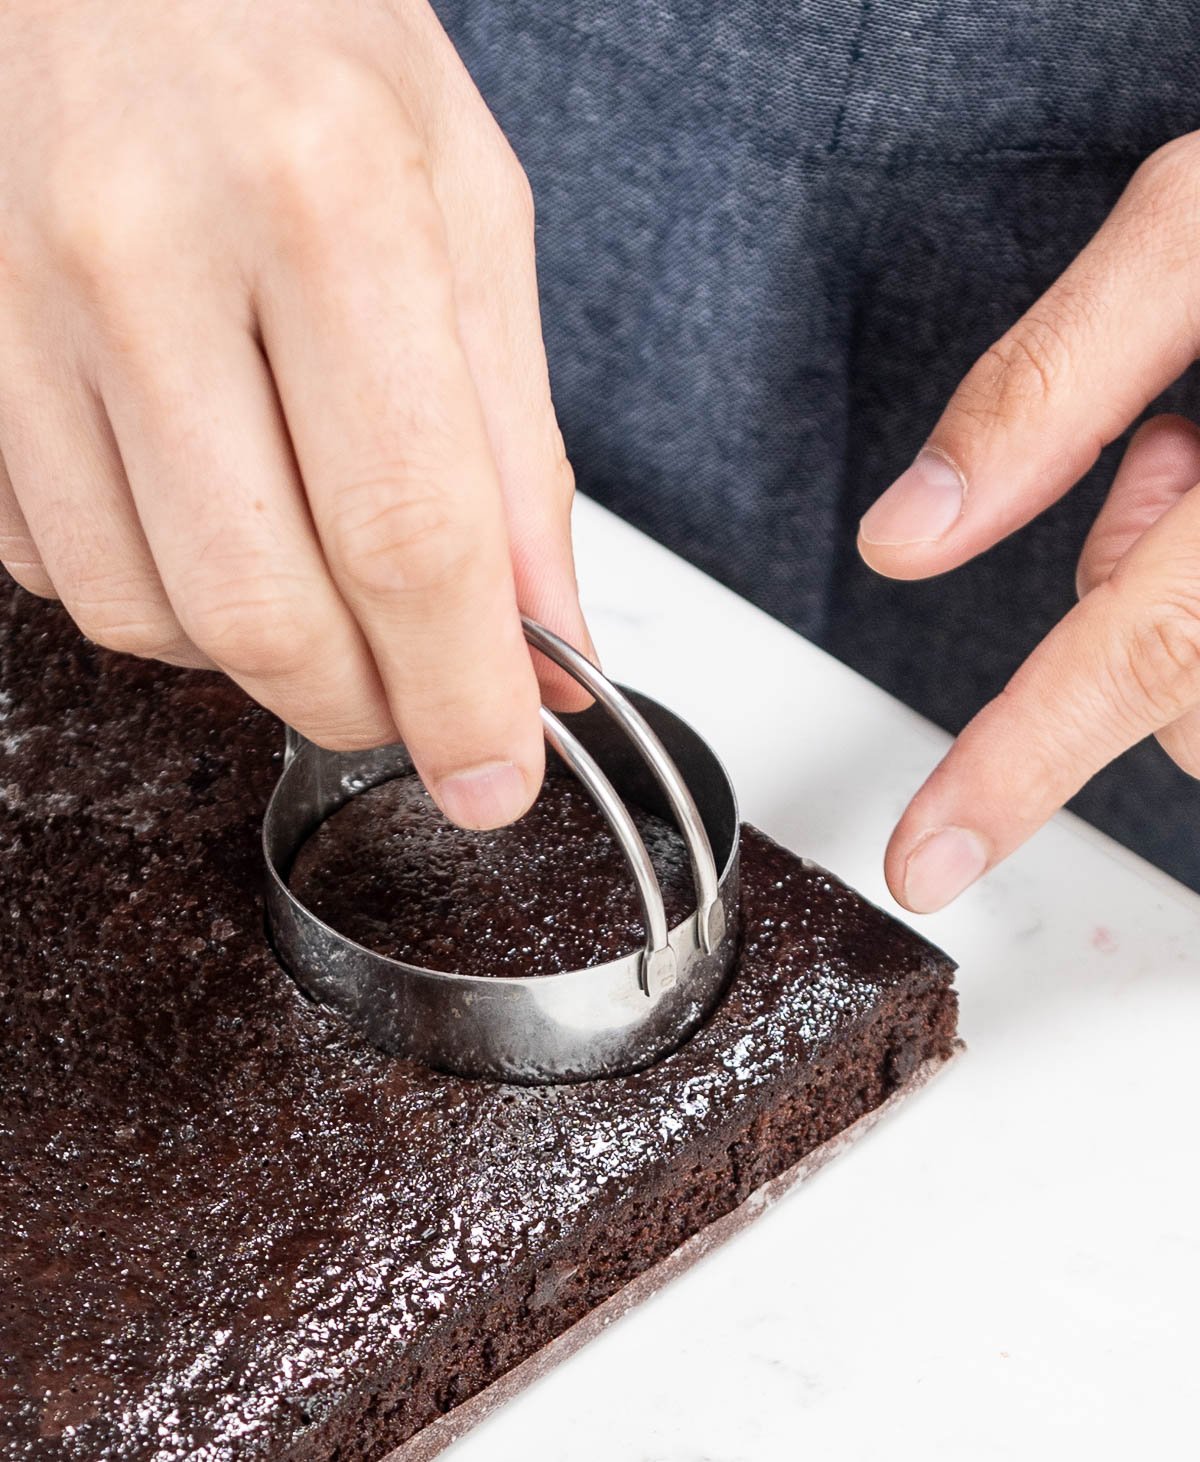 hand placing cake ring into cake